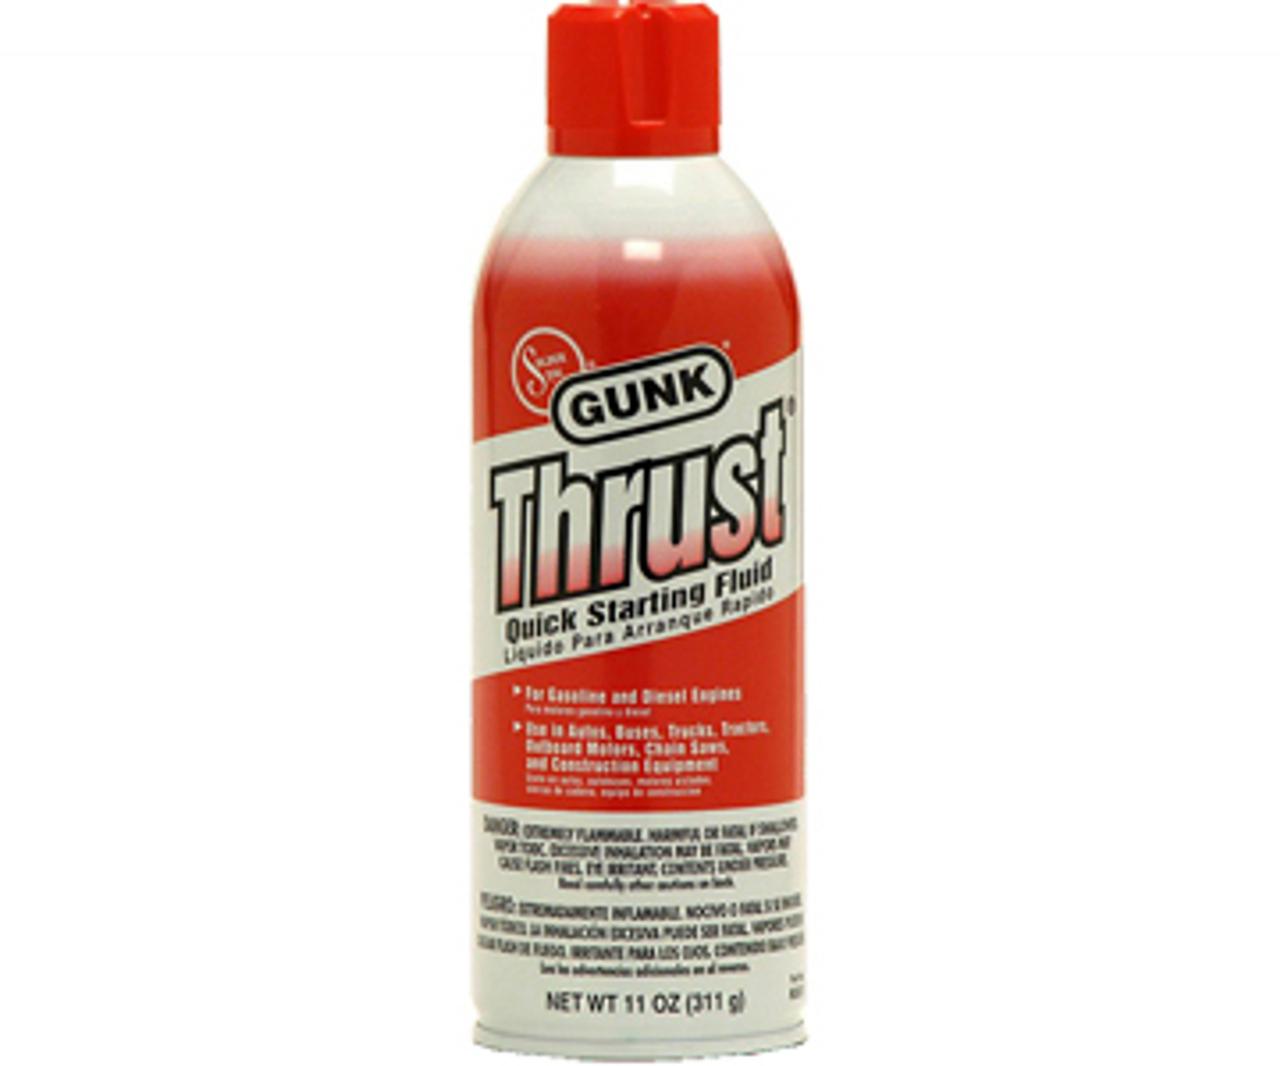 Gunk Thrust Quick Starting Fluid Midwest Technology Products